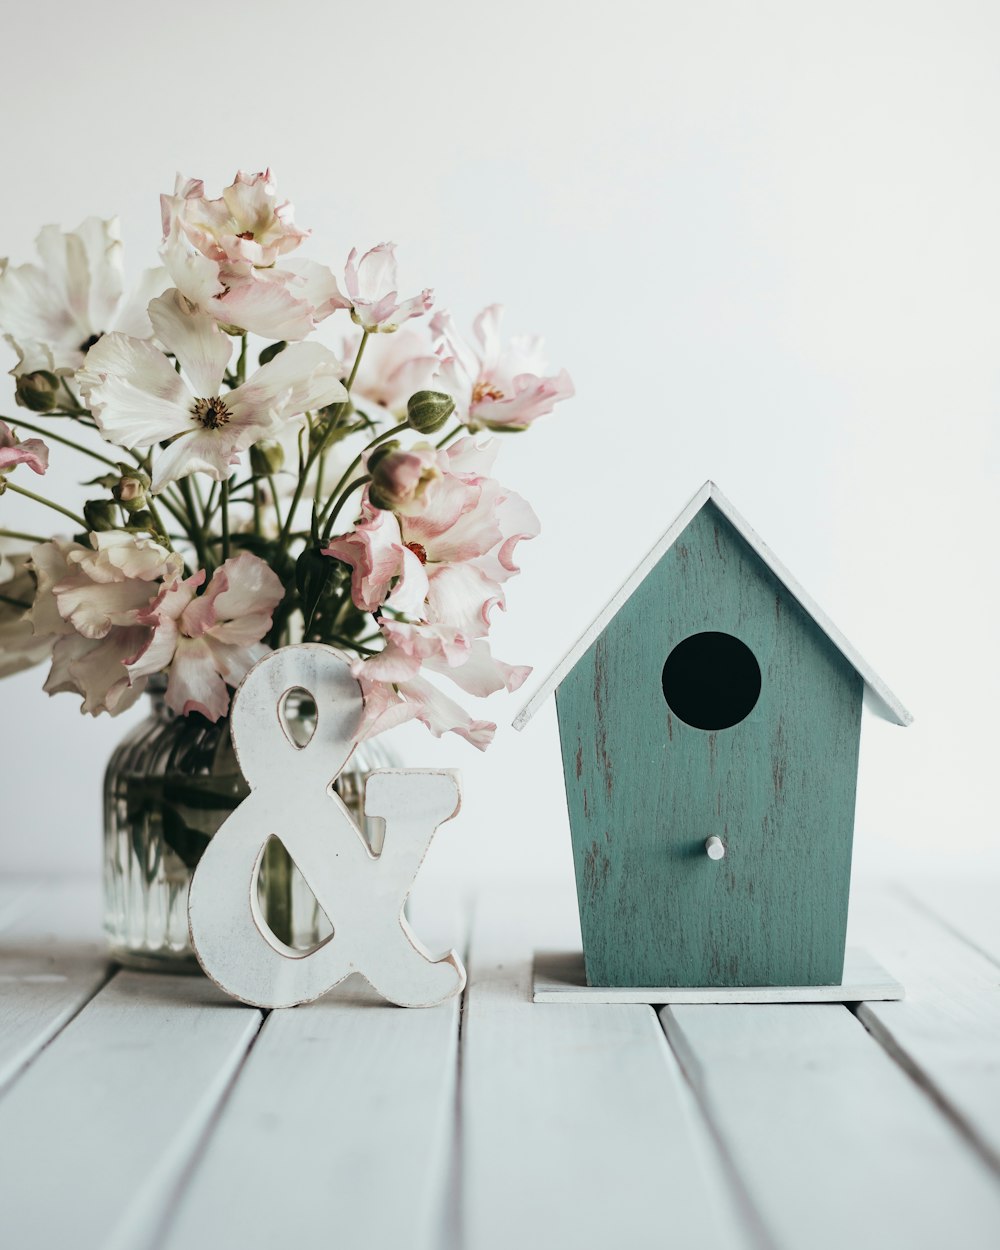 a wooden birdhouse next to a vase of flowers